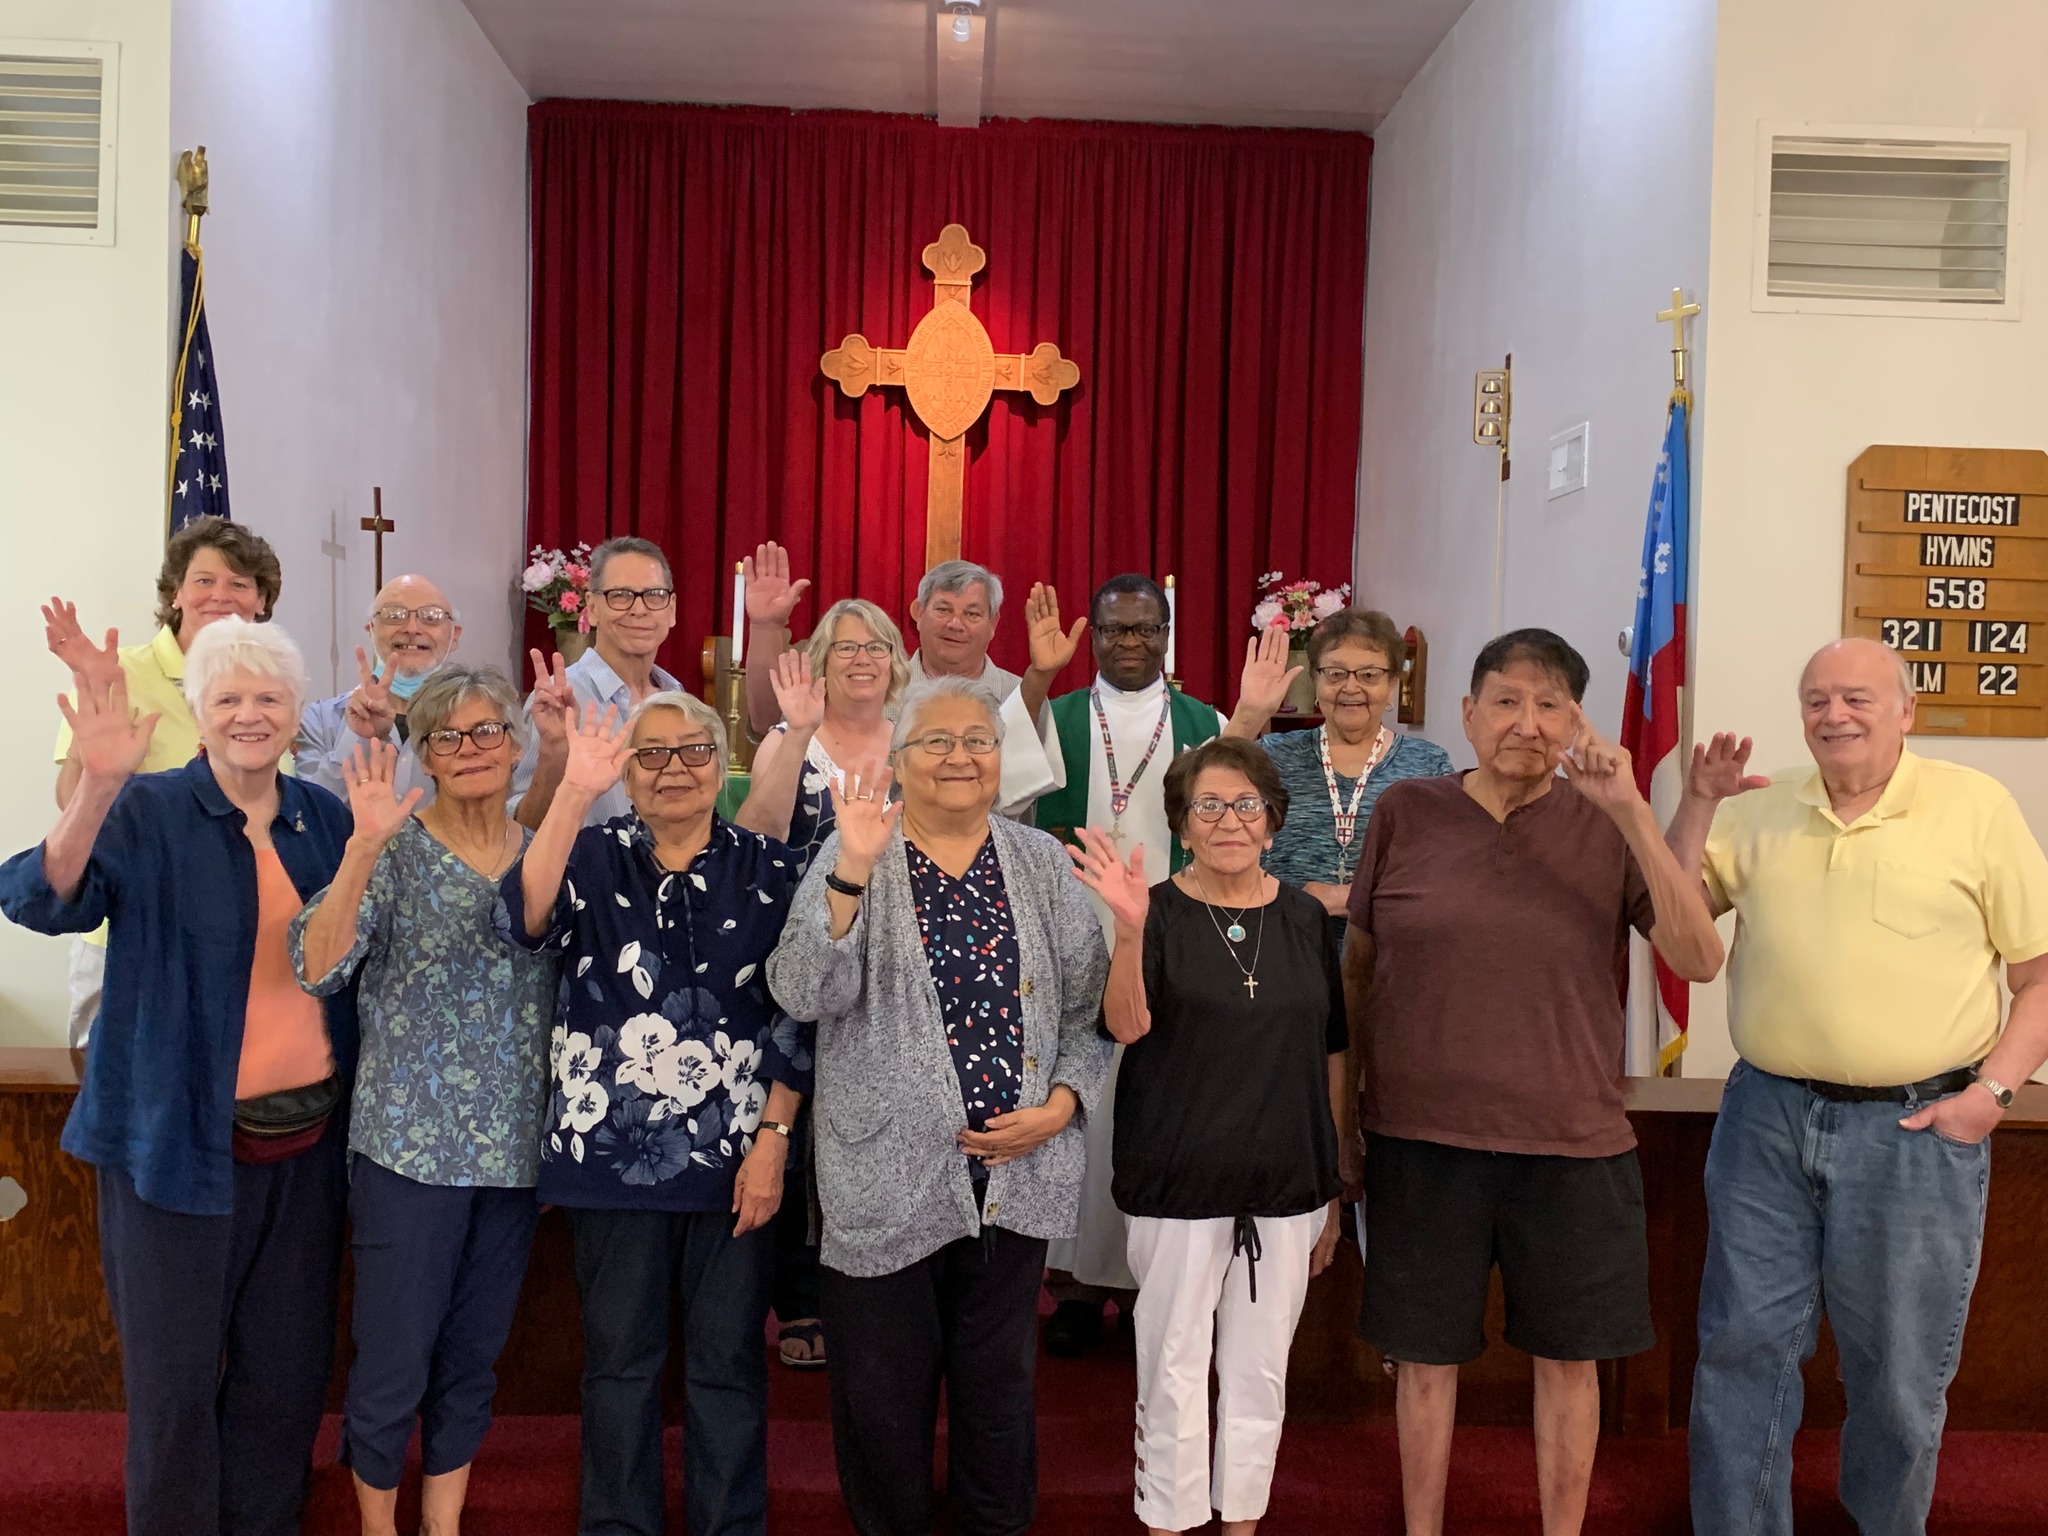 Church members standing and waving in front of the altar